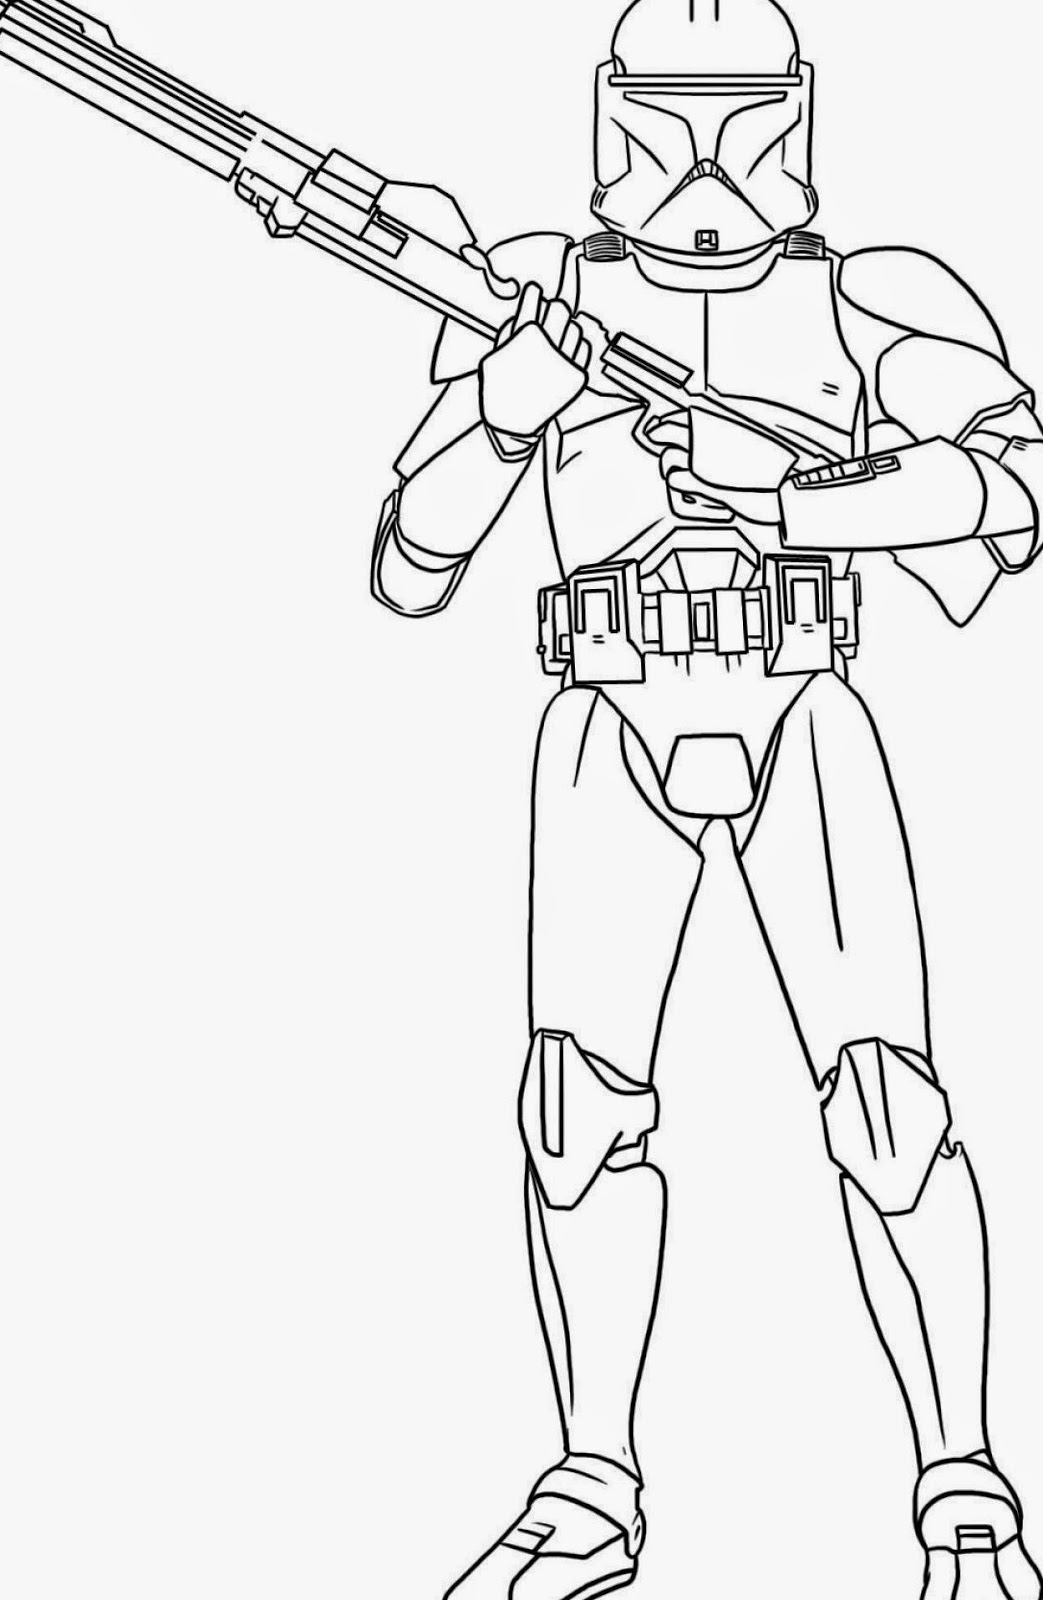 Download Coloring Pages: Star Wars Free Printable Coloring Pages